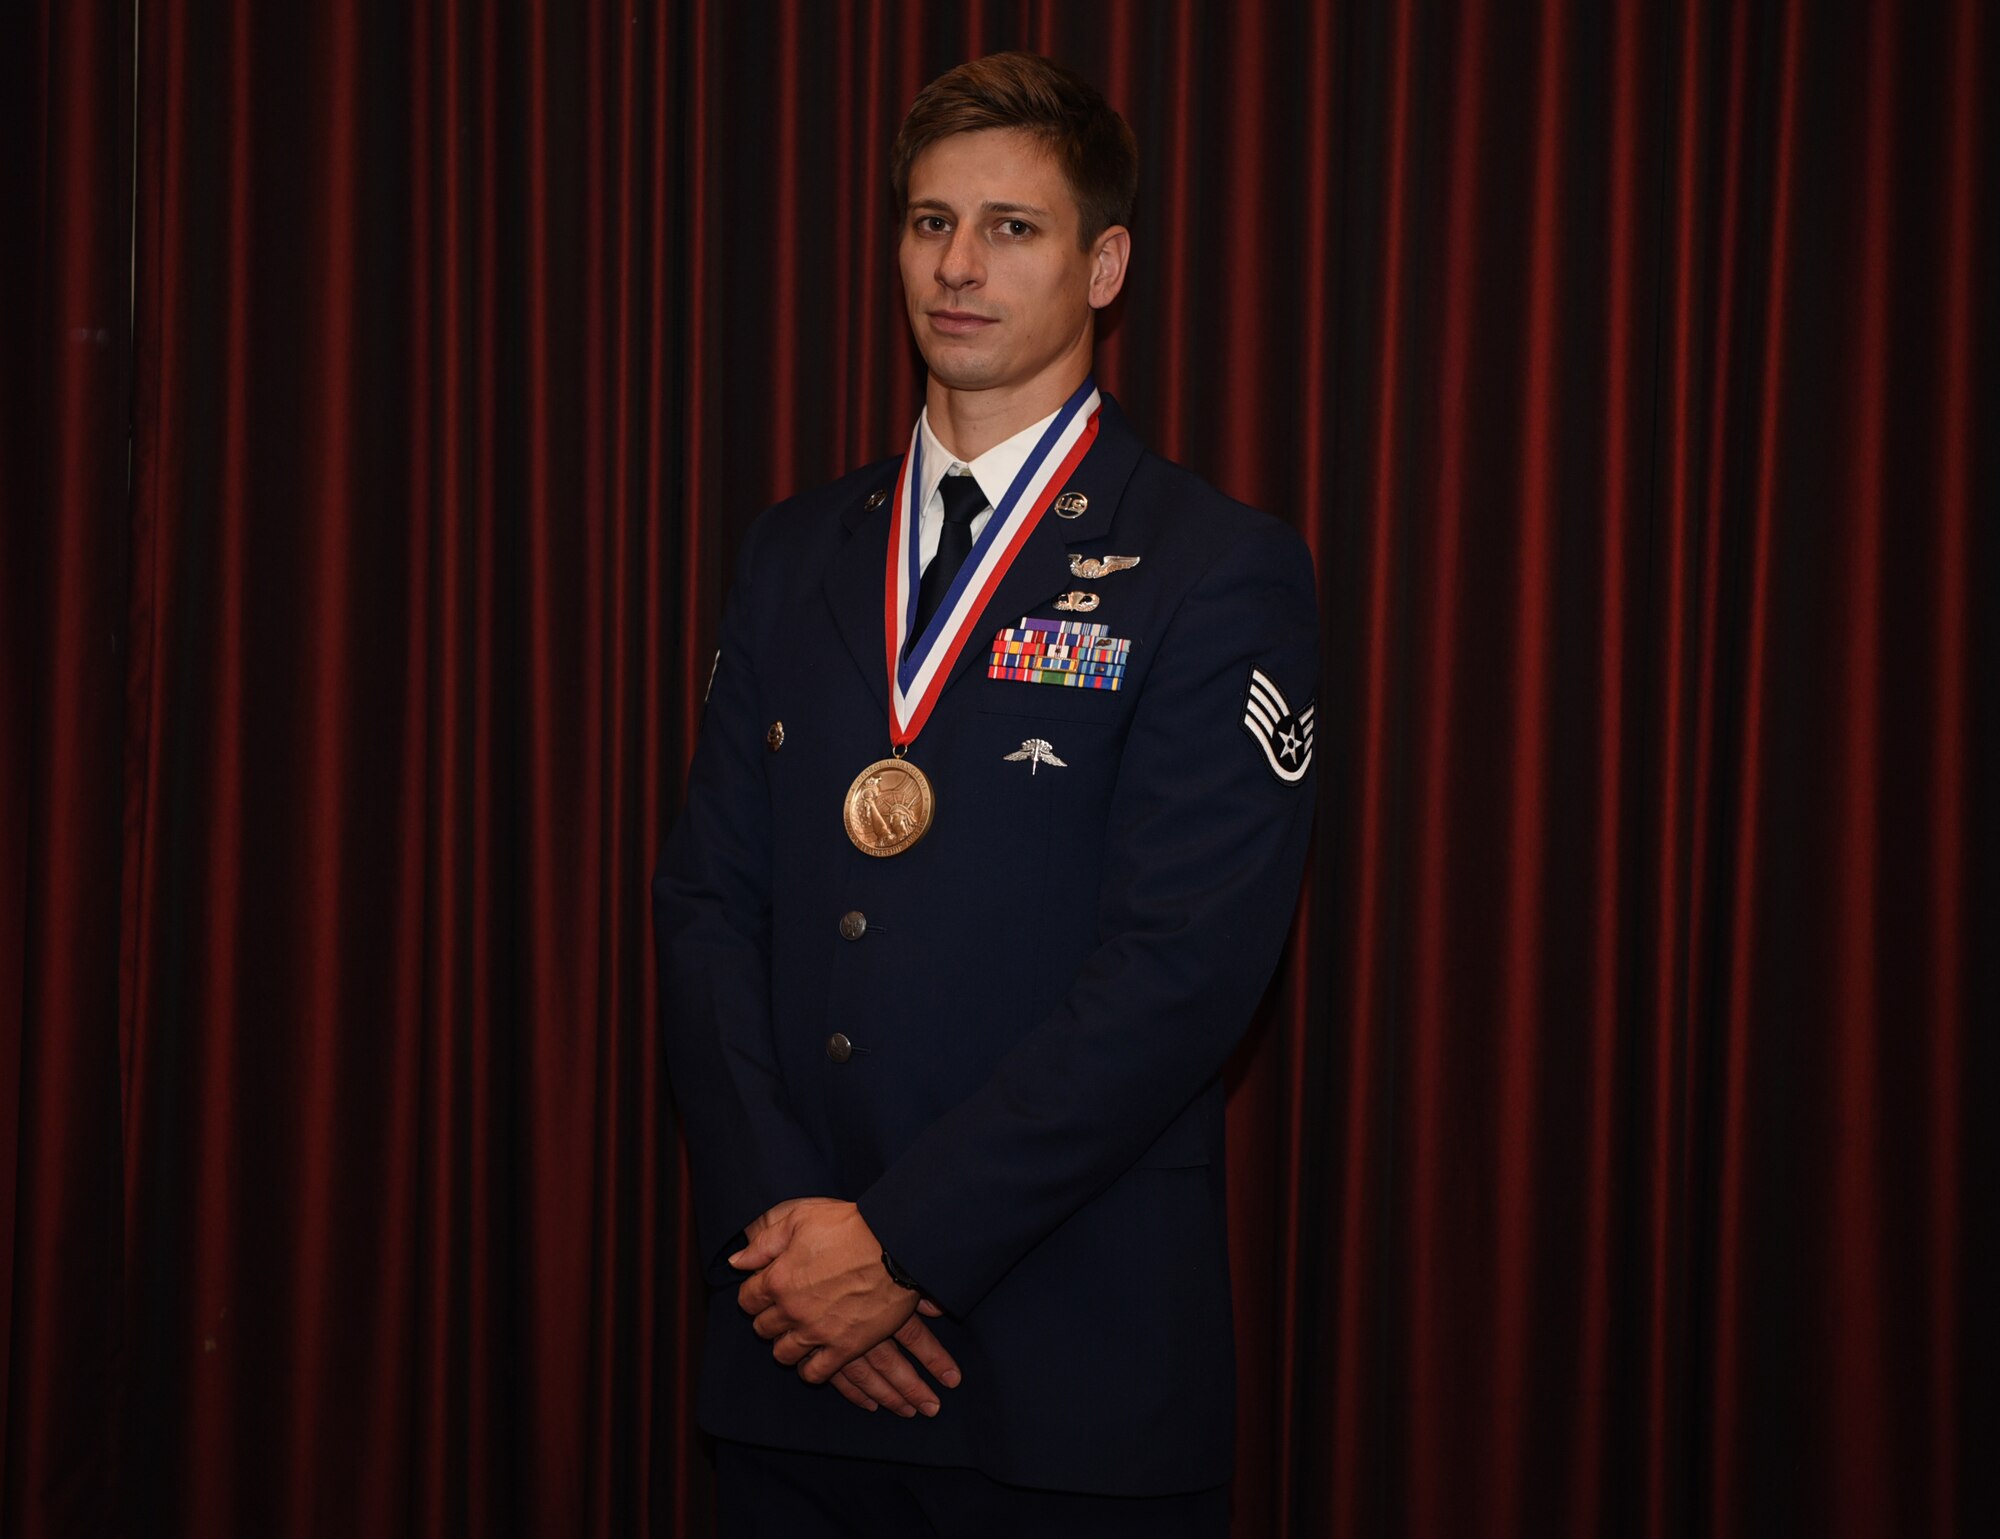 U.S. Air Force Staff Sgt. Aaron Metzger, 38th Rescue Squadron pararescueman stationed at Moody Air Force Base, Georgia, poses for a photo during the 57th Annual USO Armed Forces Gala at the New York Marriott Marquis in New York City, Dec. 12, 2018. Metzger received the George Van Cleave Military Leadership Award for rescuing and providing medical aid to injured allies, foreign and domestic, while critically injured as well. (U.S. Air Force photo by Airman 1st Class Ariel Owings)